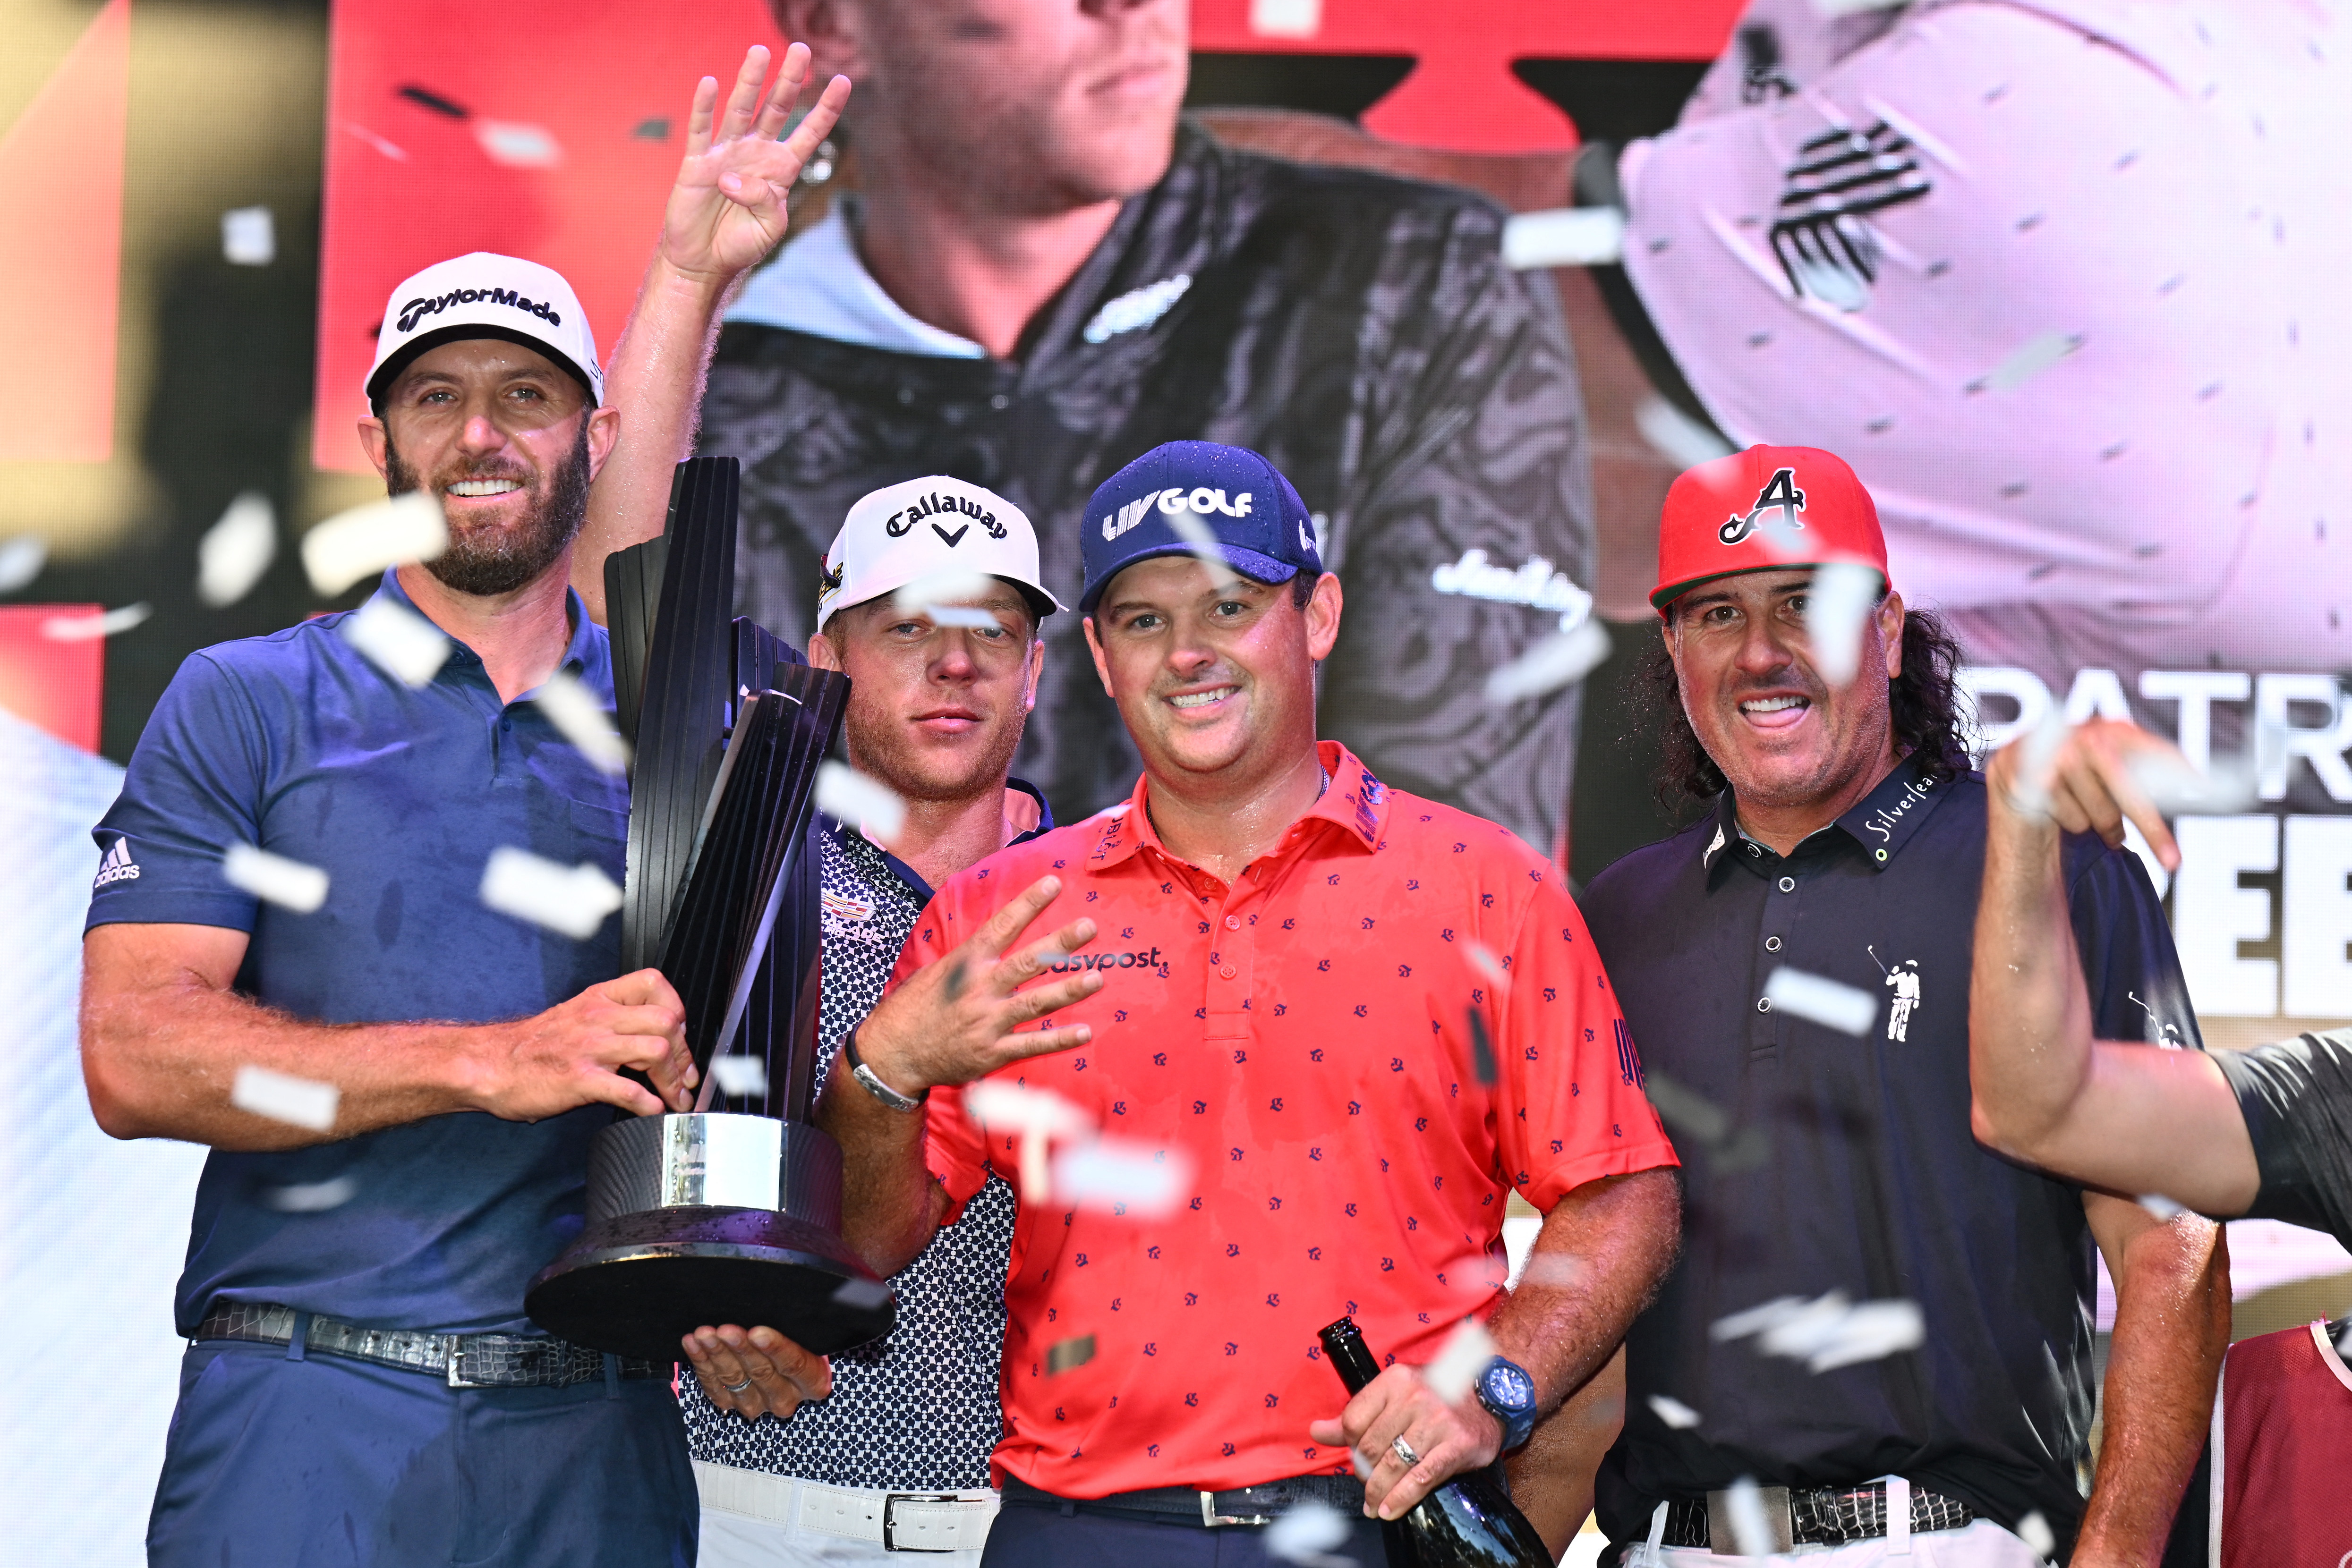 Sep 18, 2022; Chicago, Illinois, USA; From left, Dustin Johnson, Talor Gooch, Patrick Reed and Pat Perez celebrate their team win after the final round of the Invitational Chicago LIV Golf tournament at Rich Harvest Farms. Mandatory Credit: Jamie Sabau-USA TODAY Sports